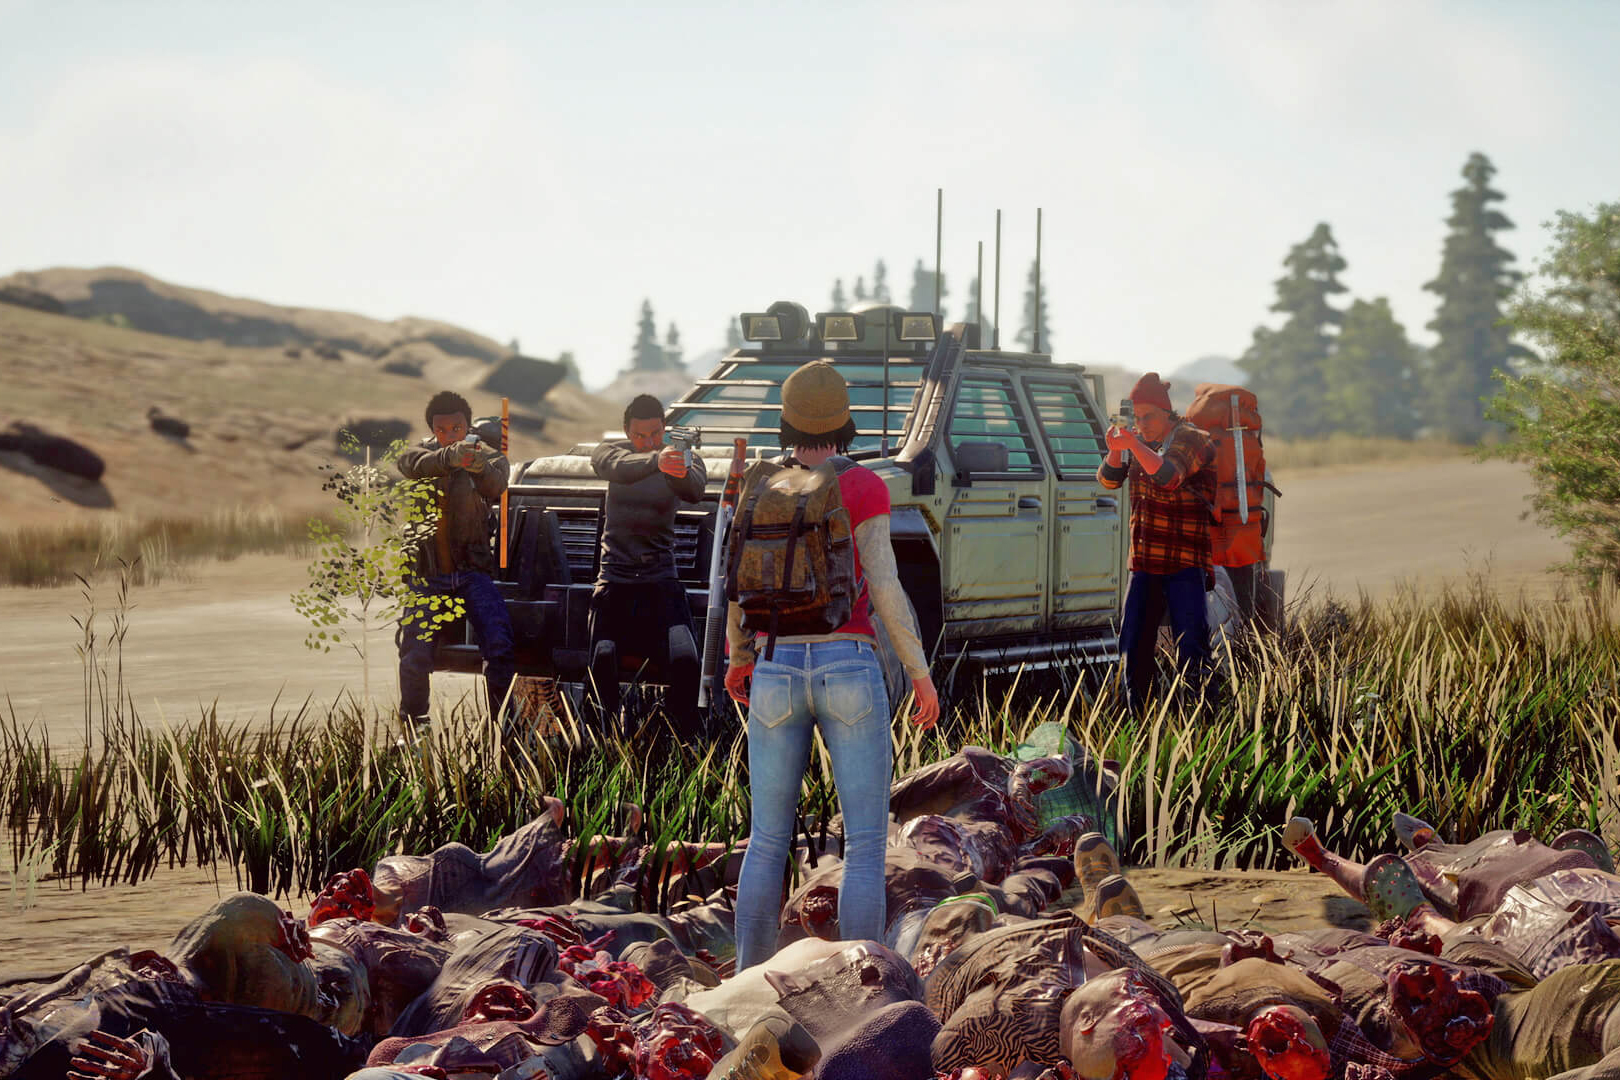 State of Decay 2 Trailer Showcases Base Management and Zombie Killing